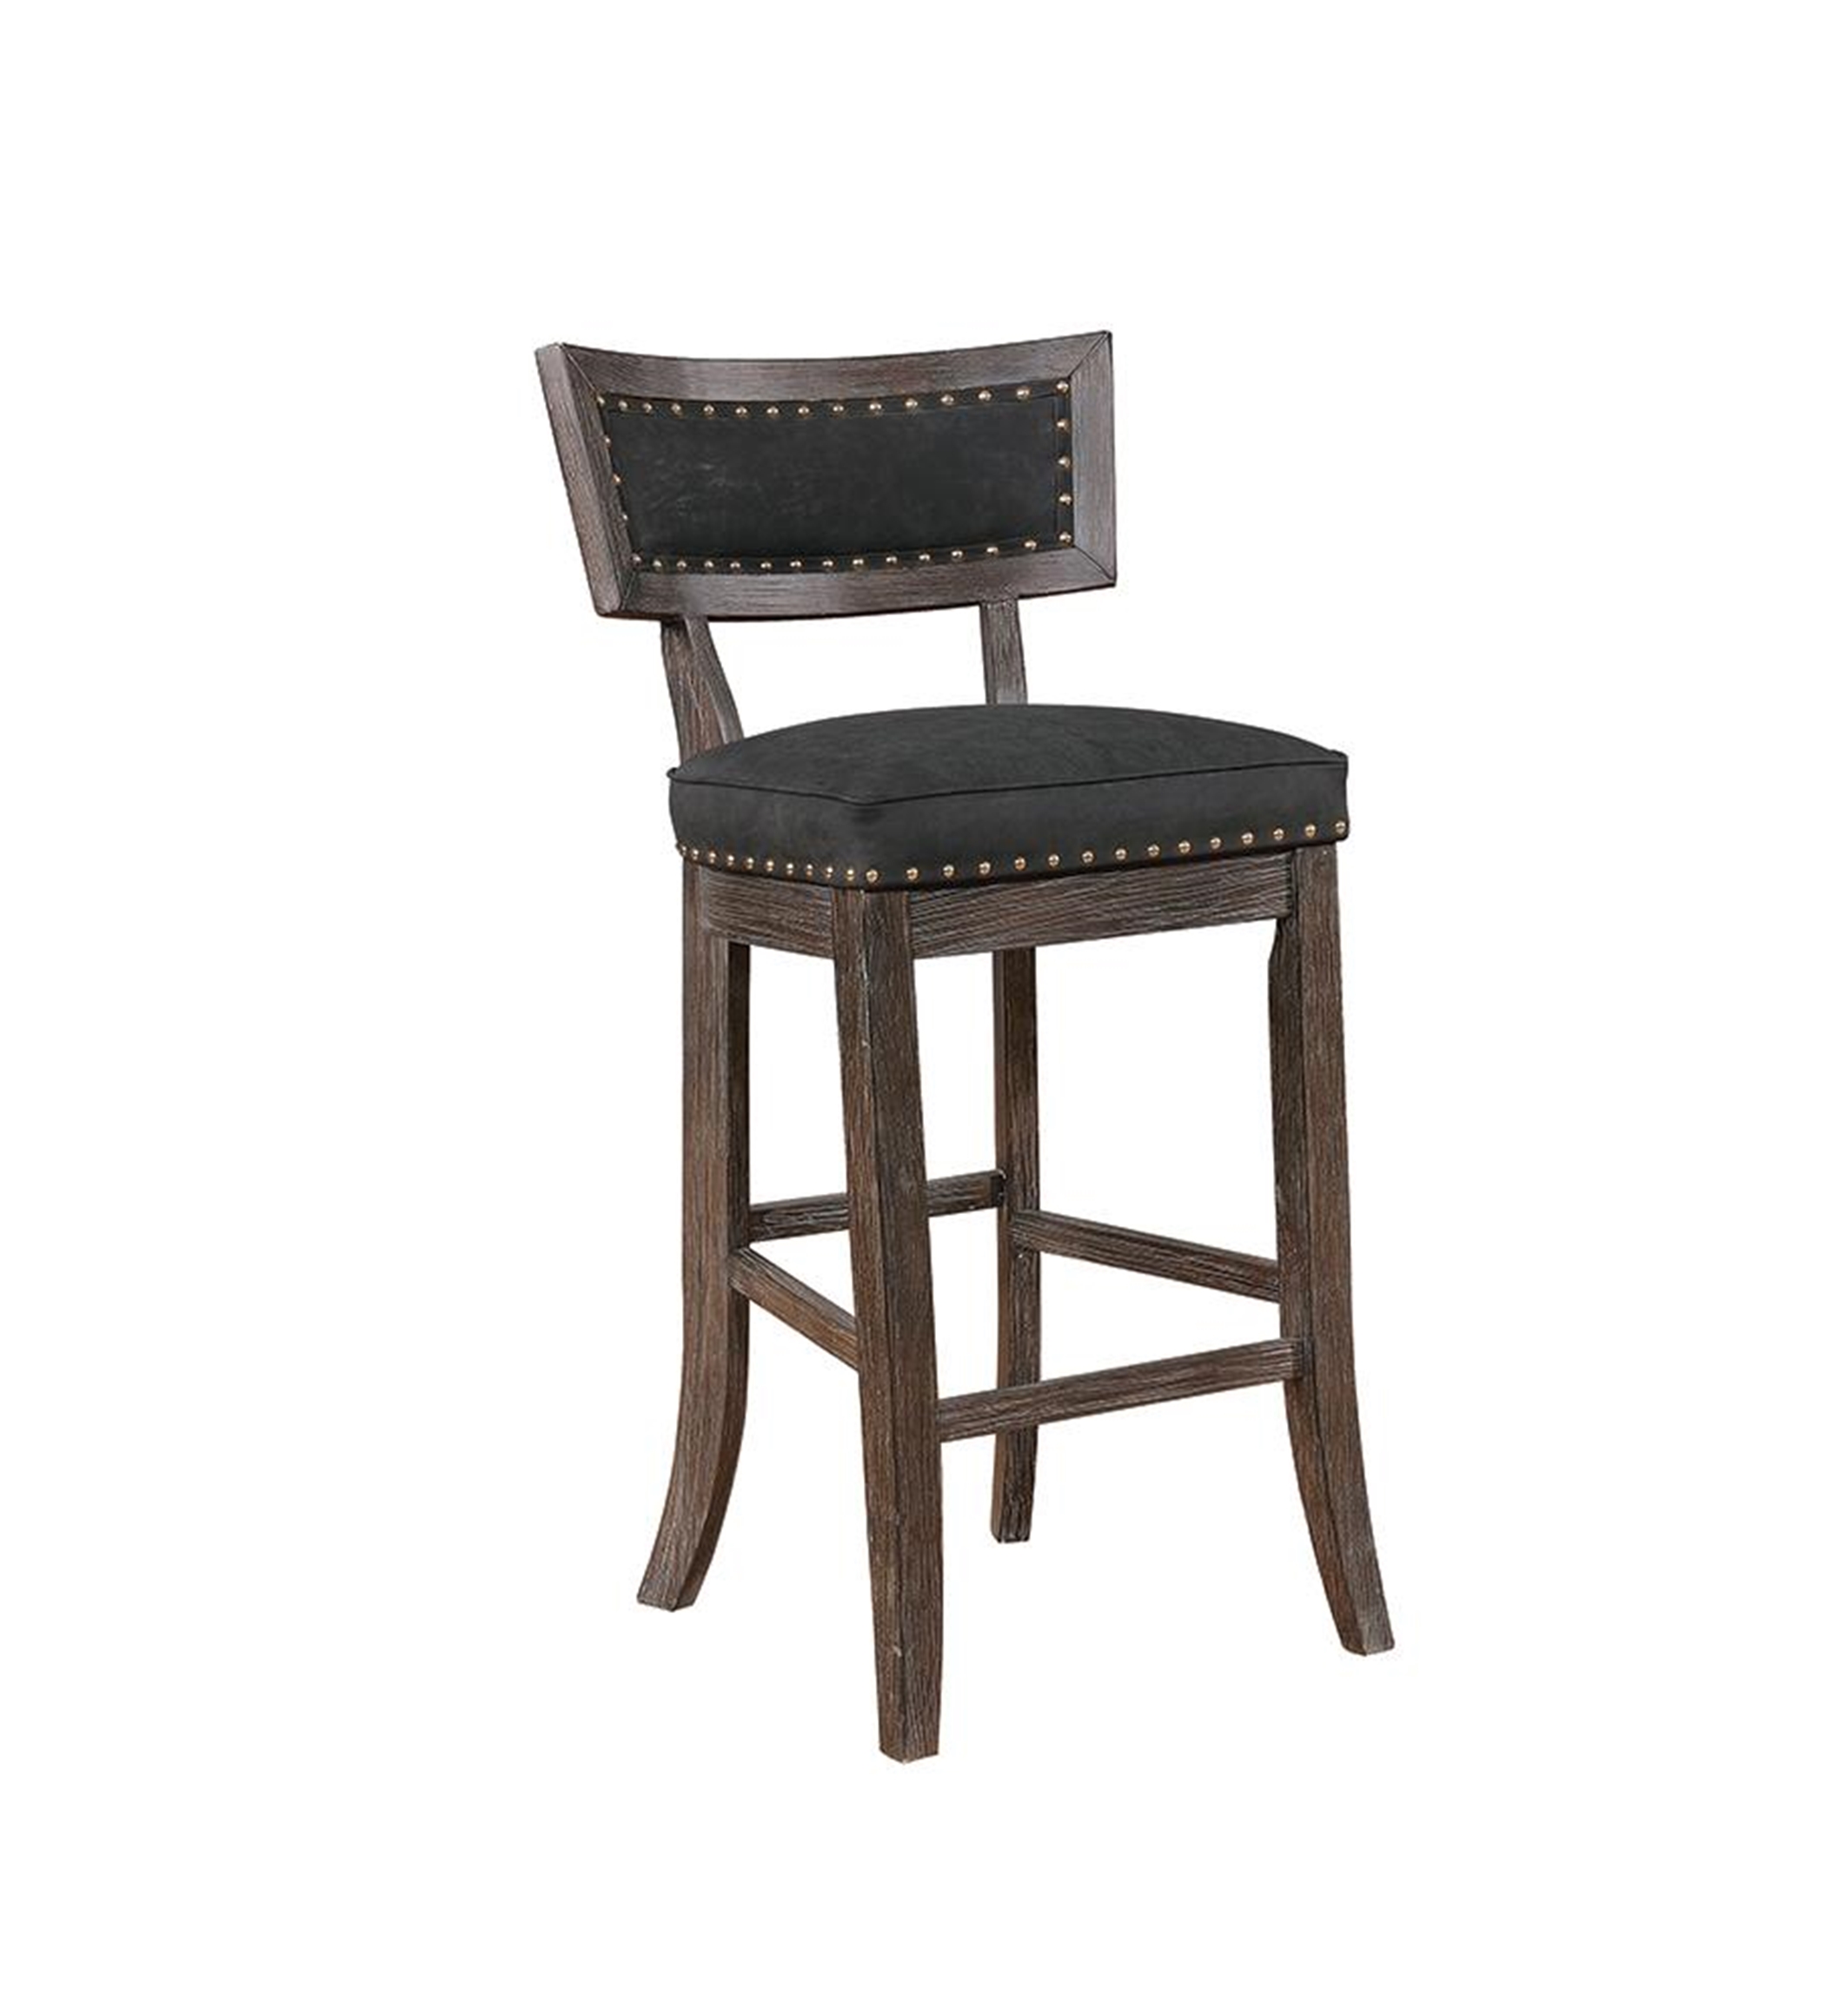 Rustic Black Bar-Height Dining Chair - Click Image to Close